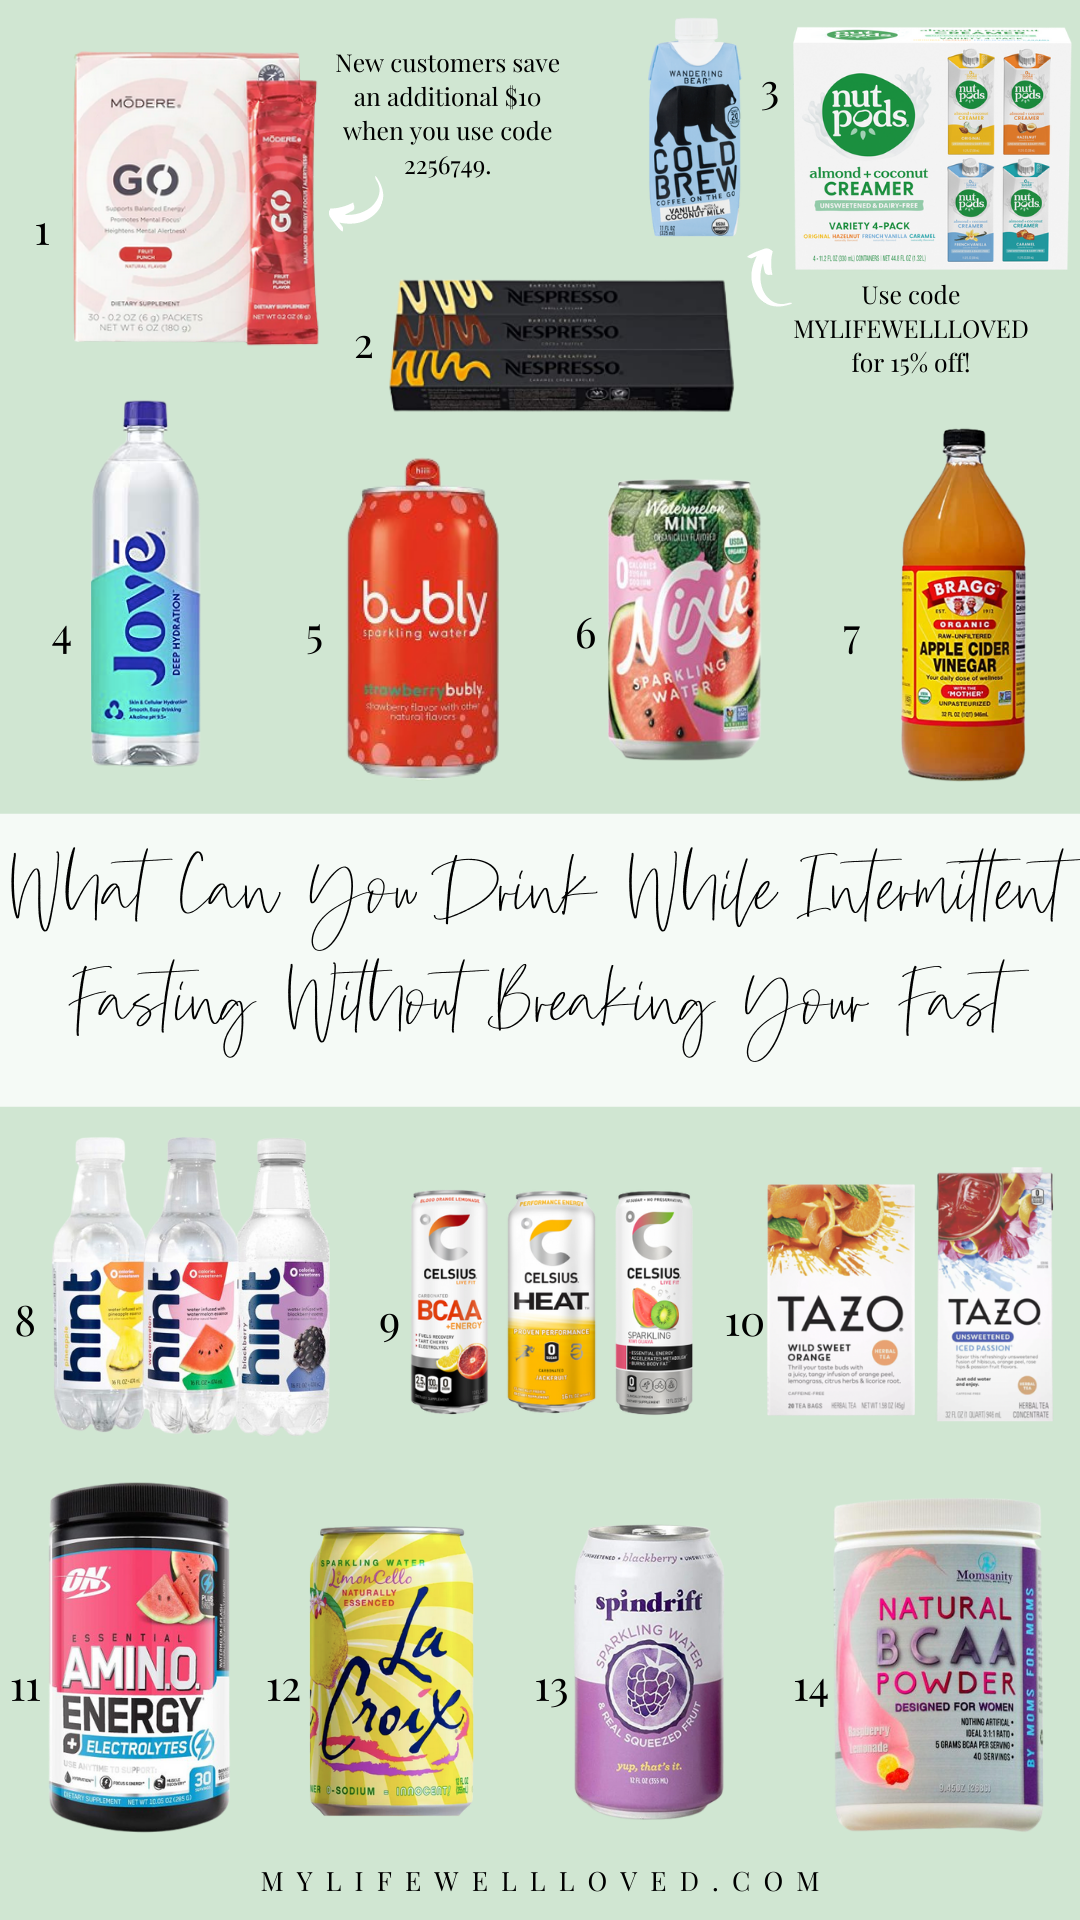 7 Best Drinks For Intermittent Fasting – FULFoods